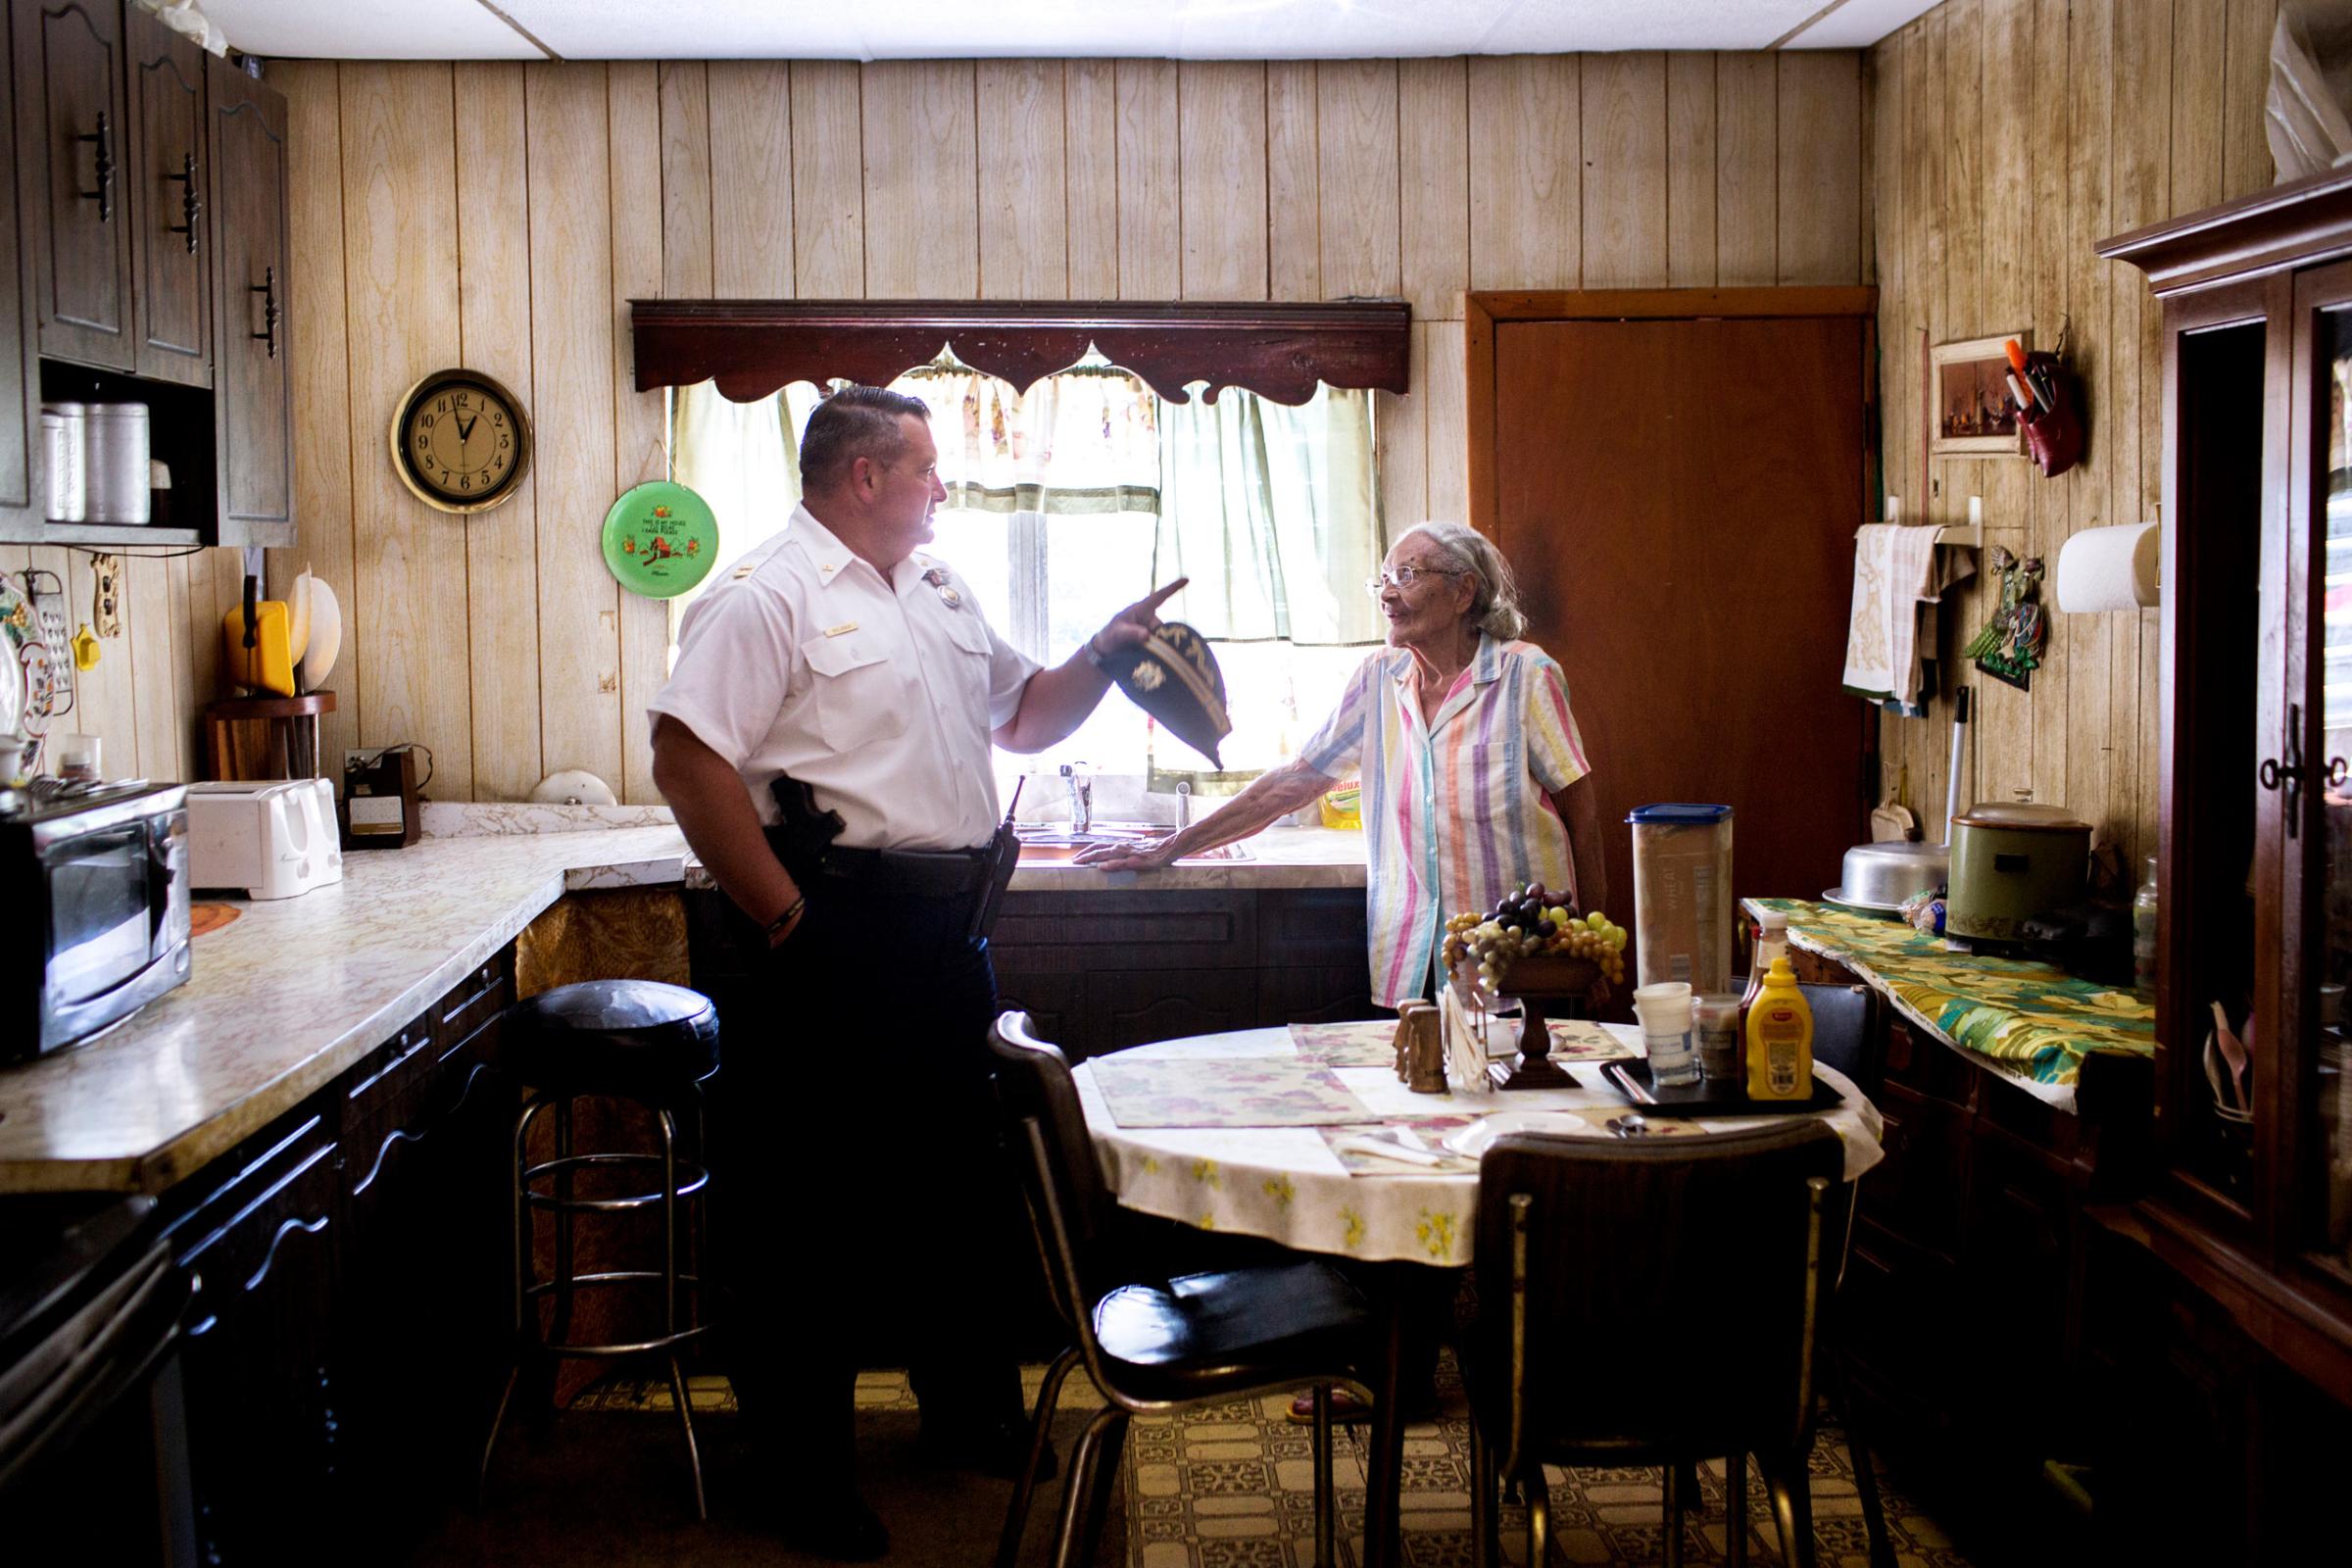 July 31th, 2015. Captain Joe Bologna chats with Louise Robinson in her kitchen after she called him in off the street to look at a problem with overgrowth in her back yard. Robinson has lived in her home down the street from the 19th District station since the 50's, and says that hers was one of the first black families to move to the neighborhood.